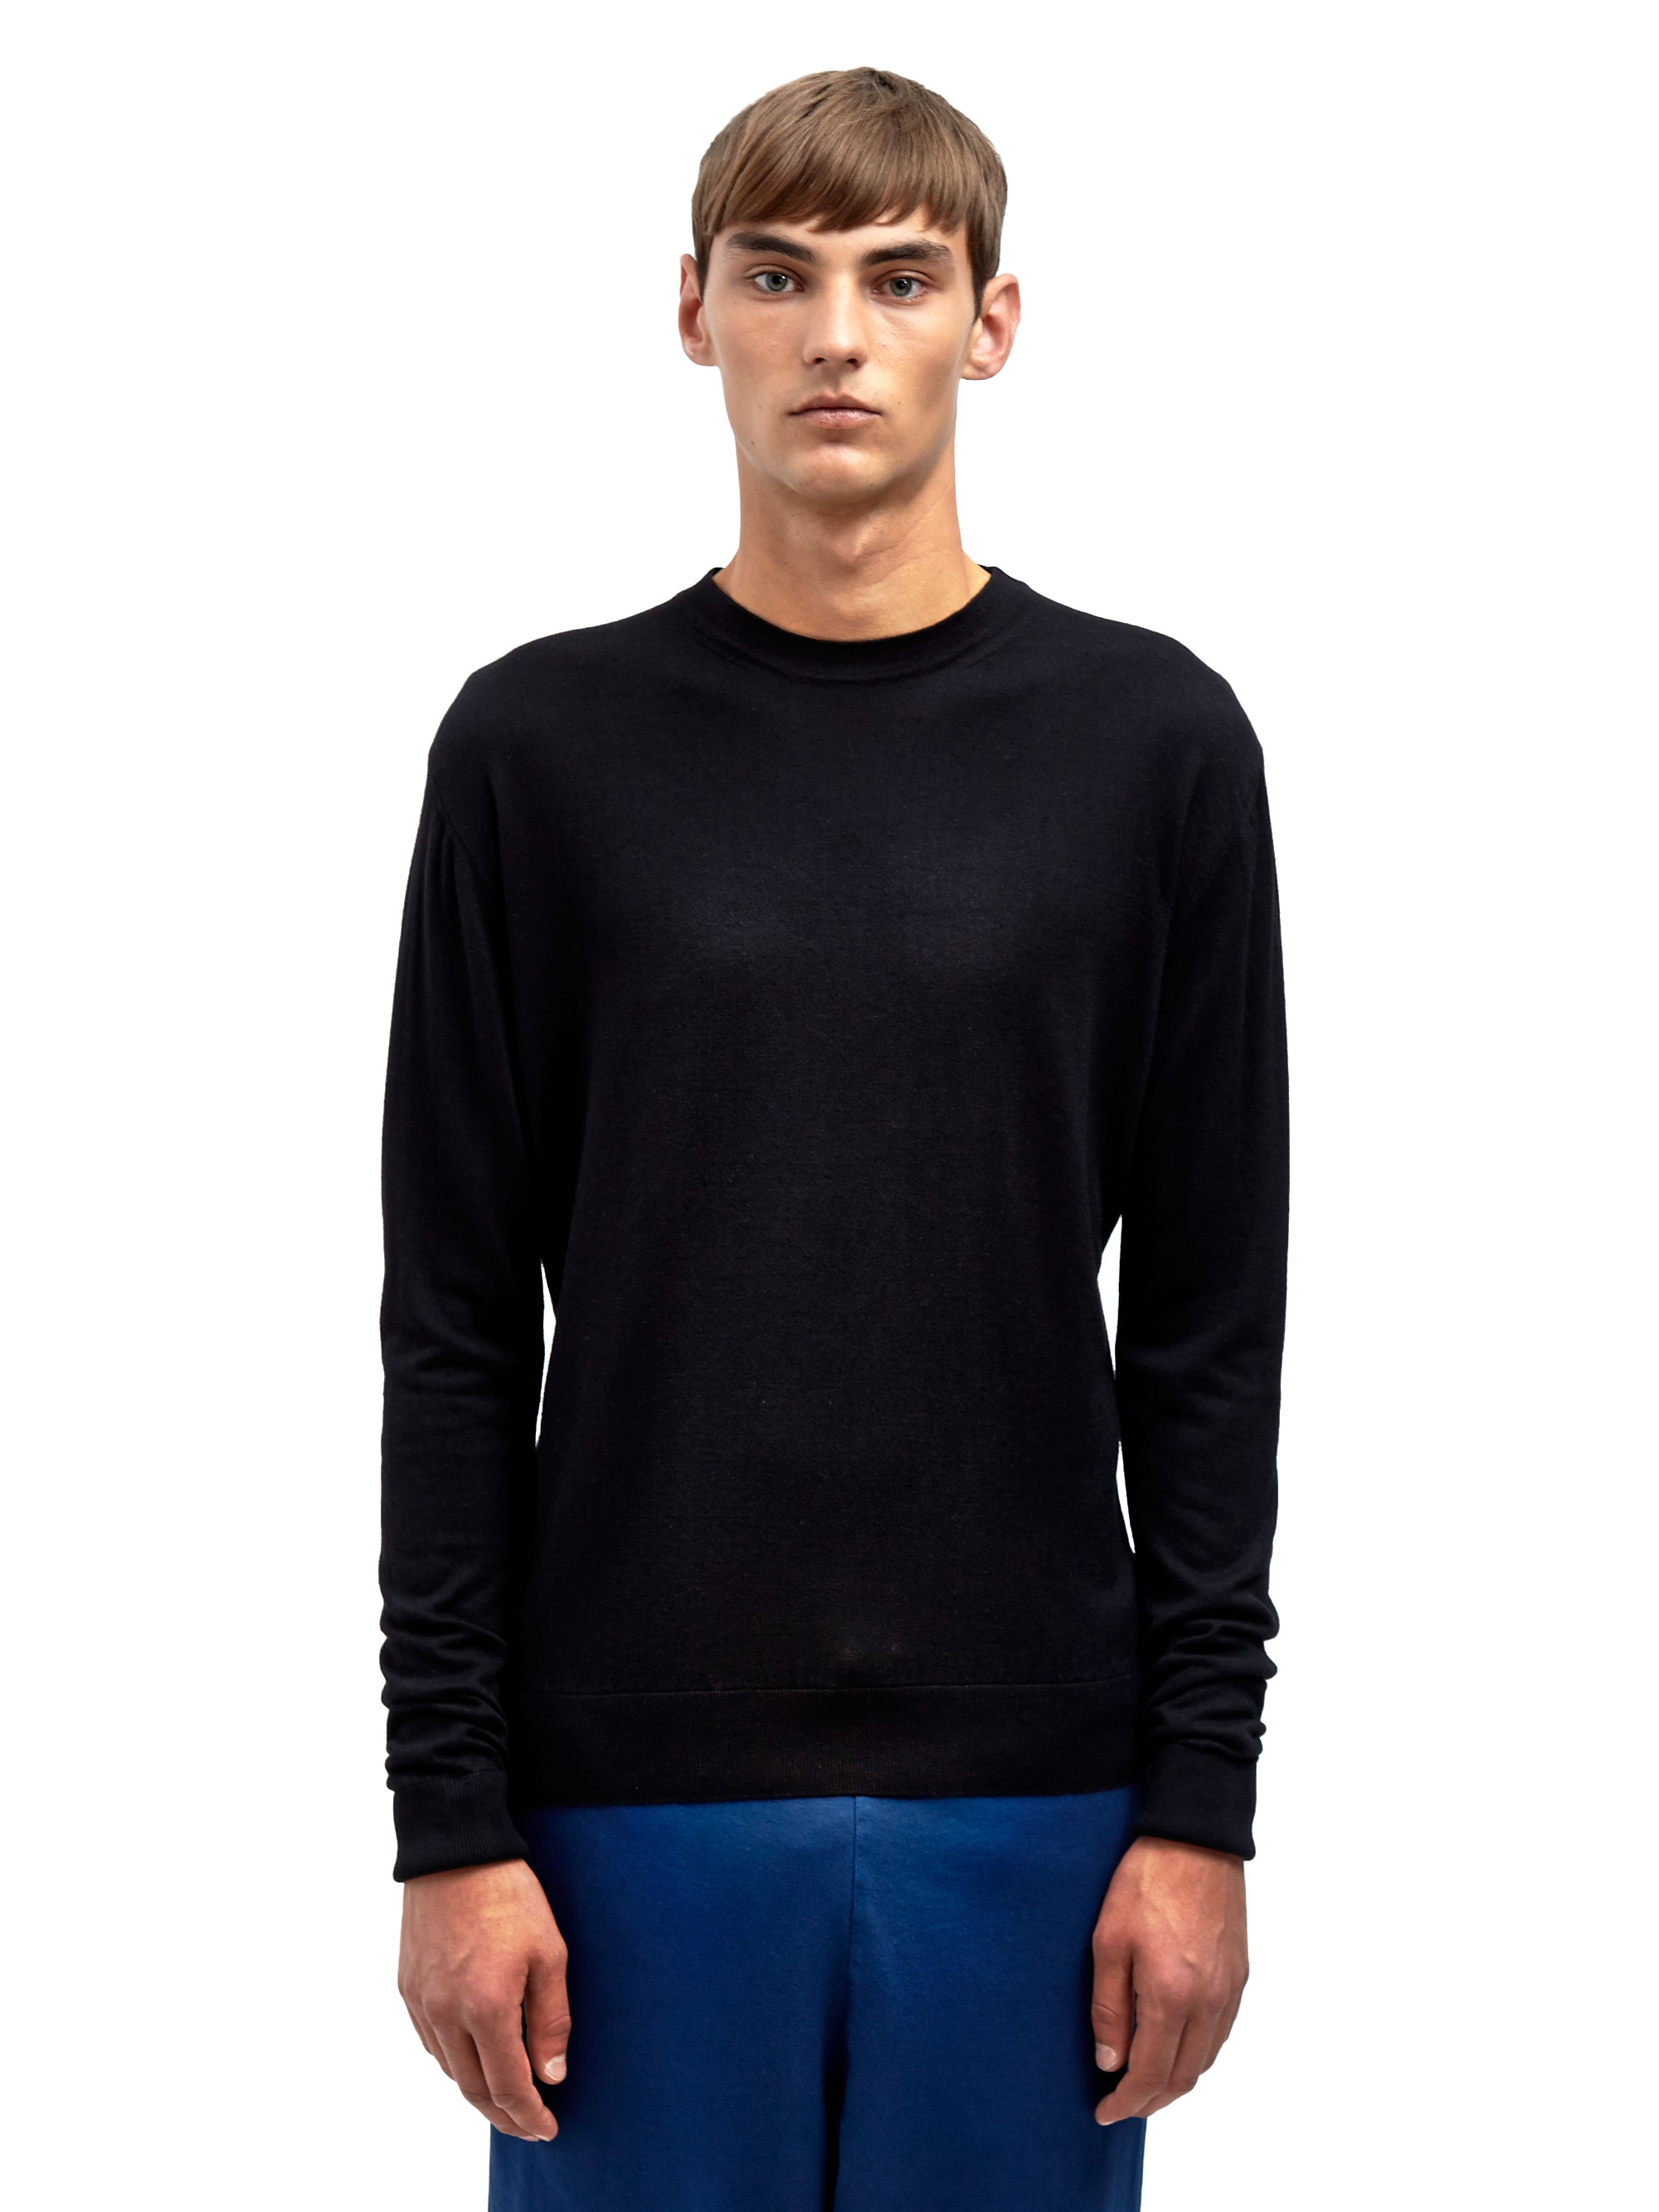 AIEZEN's Fall/Winter 2014 Collection of Luxe Basics Lands Exclusively ...